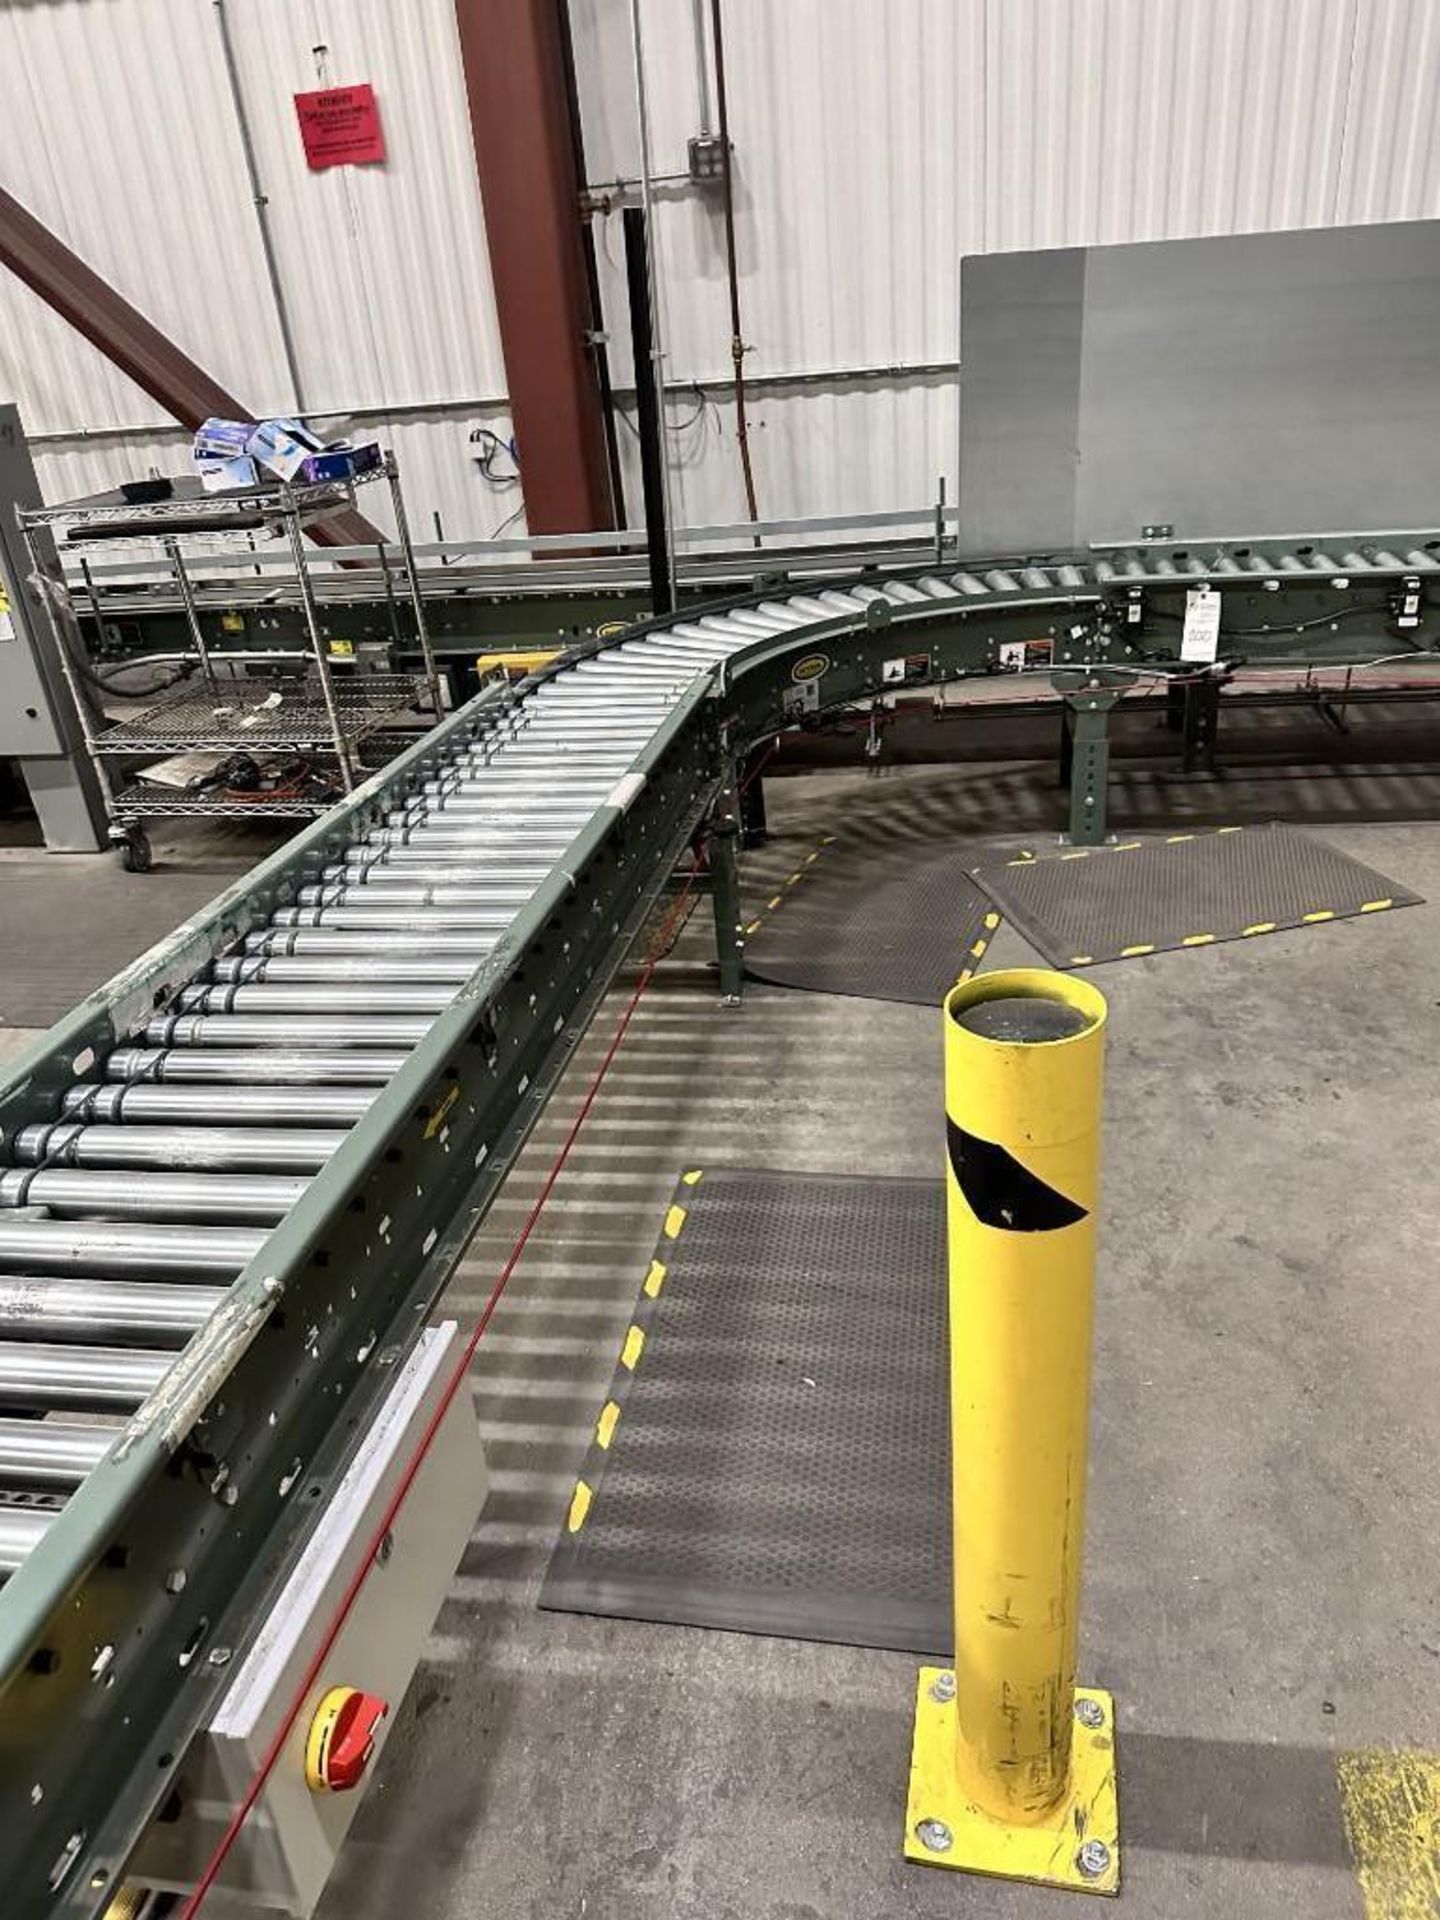 HYTROL POWER CONVEYOR SYSTEM 57 FOOT LONG DRIVEN. WITH BOX SHIFTER - Image 6 of 10